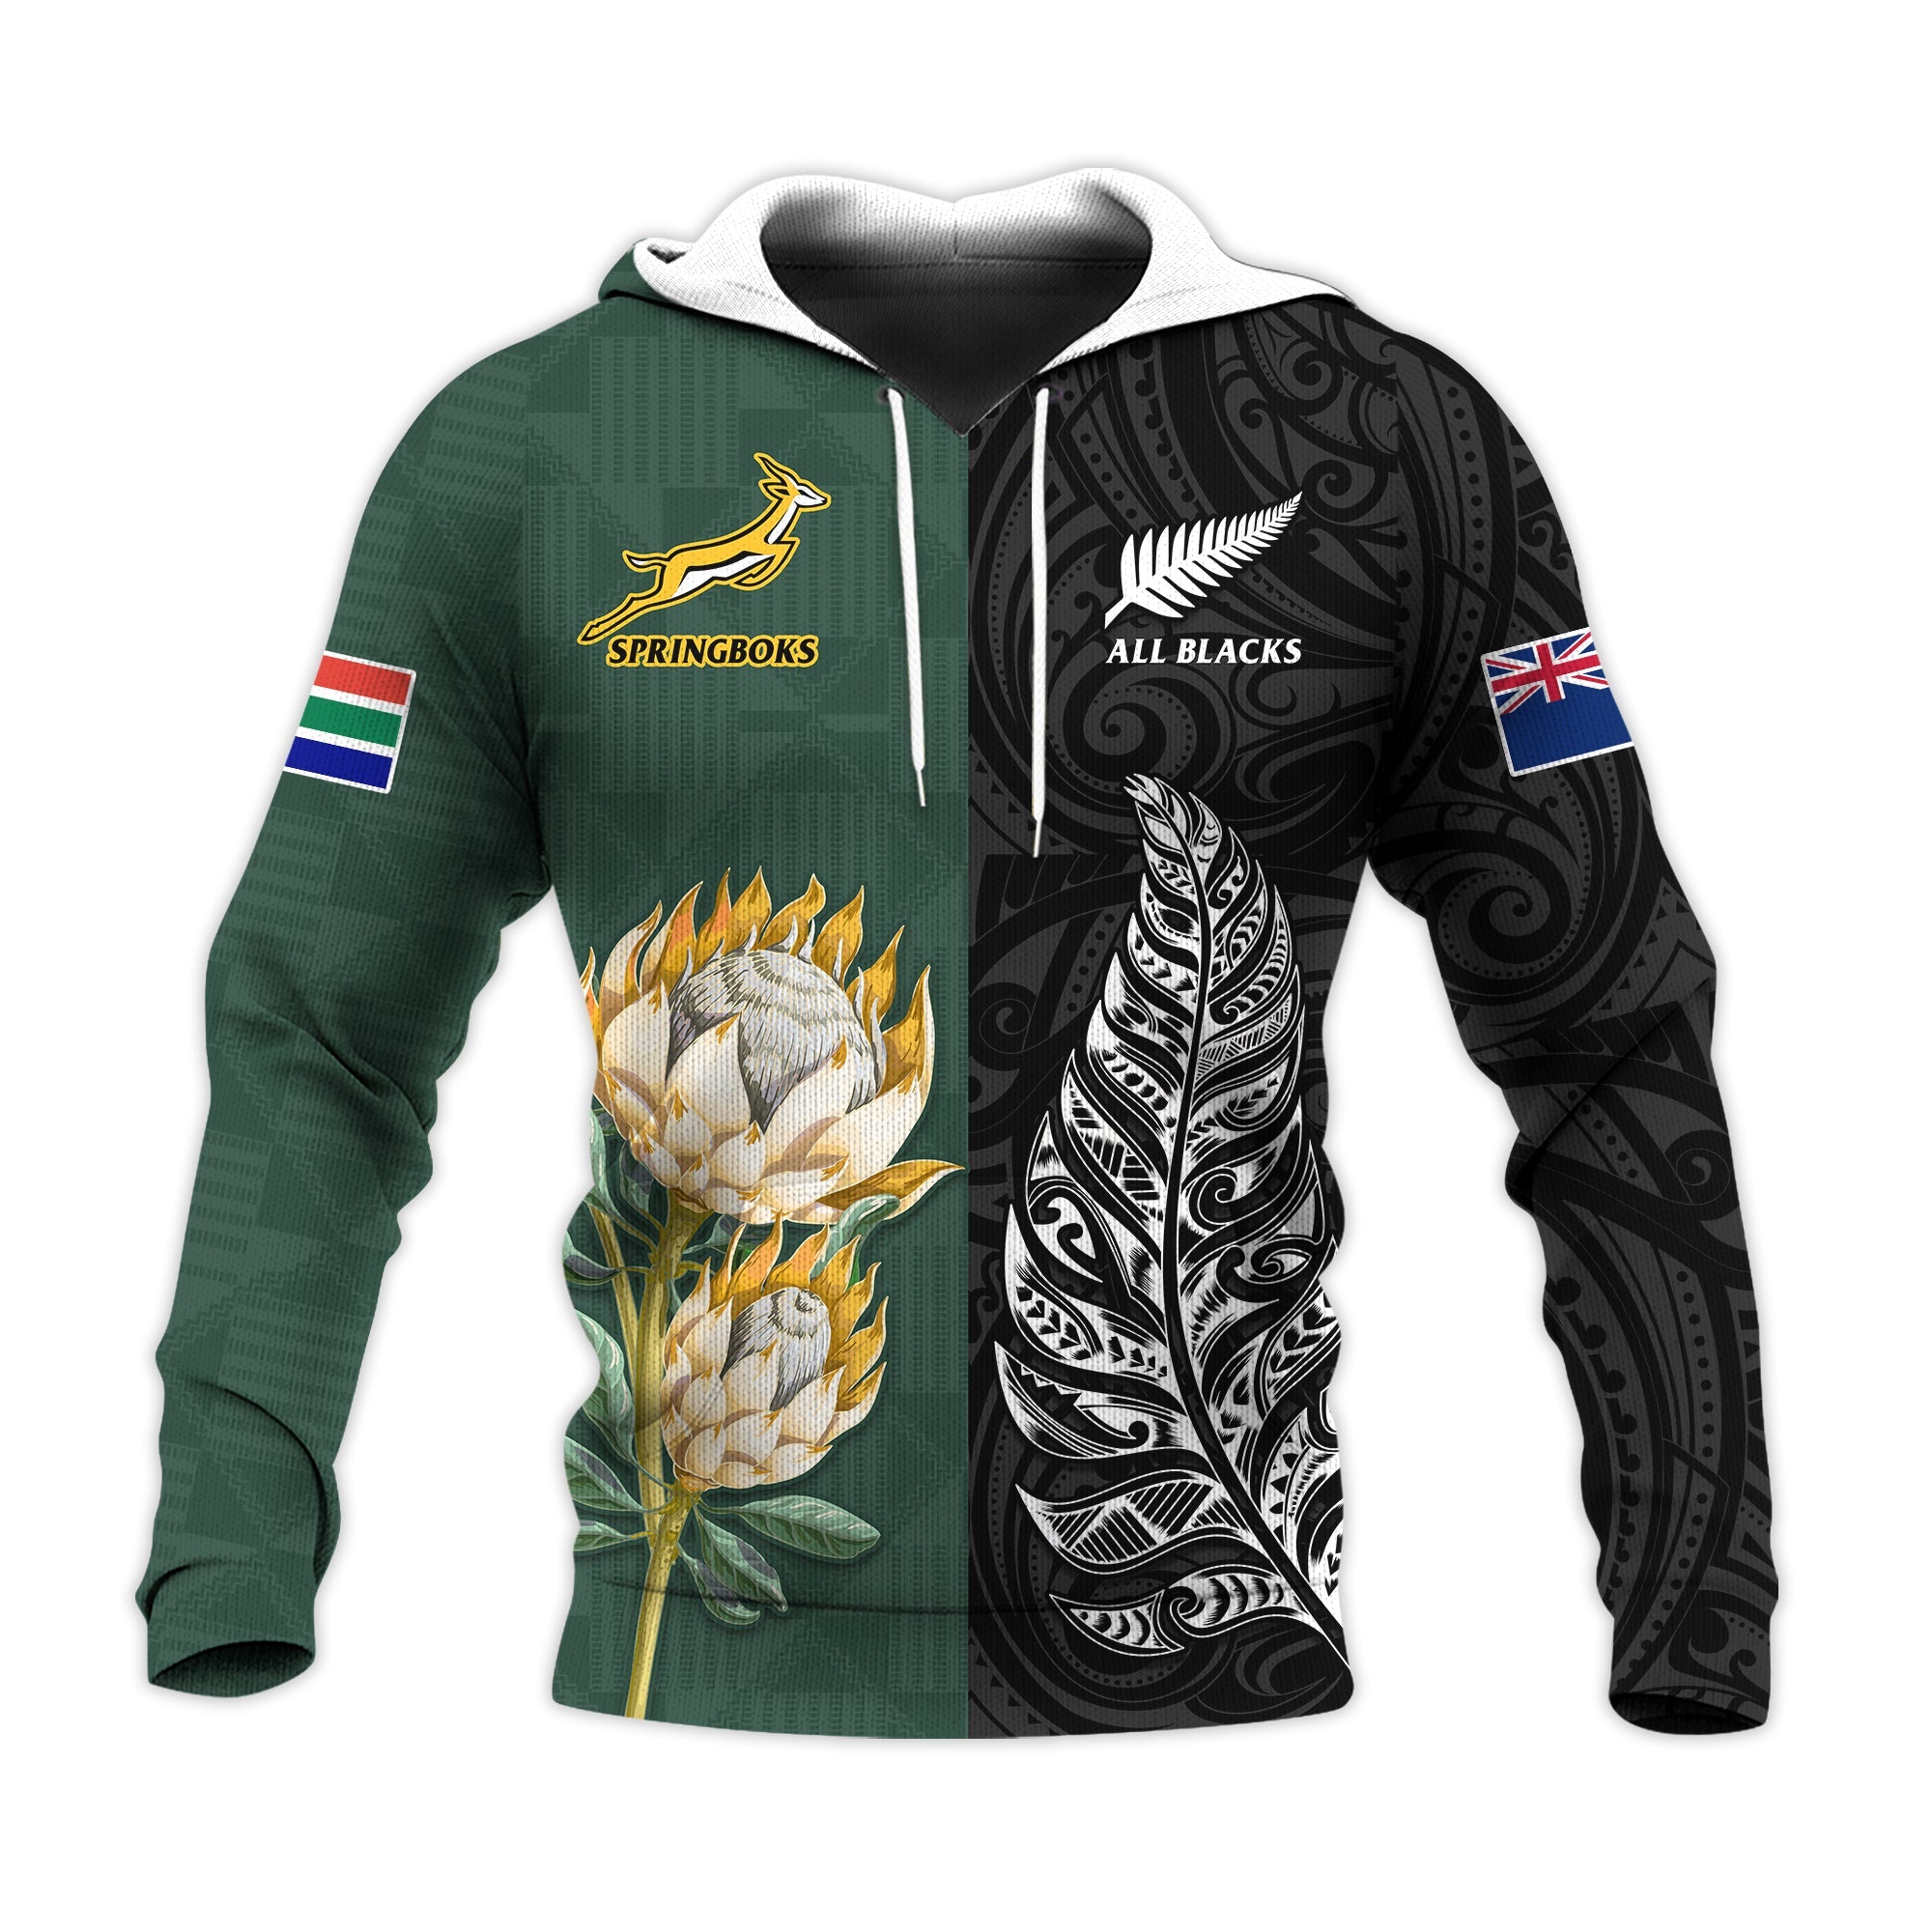 custom-text-and-number-south-africa-protea-and-new-zealand-fern-hoodie-rugby-go-springboks-vs-all-black